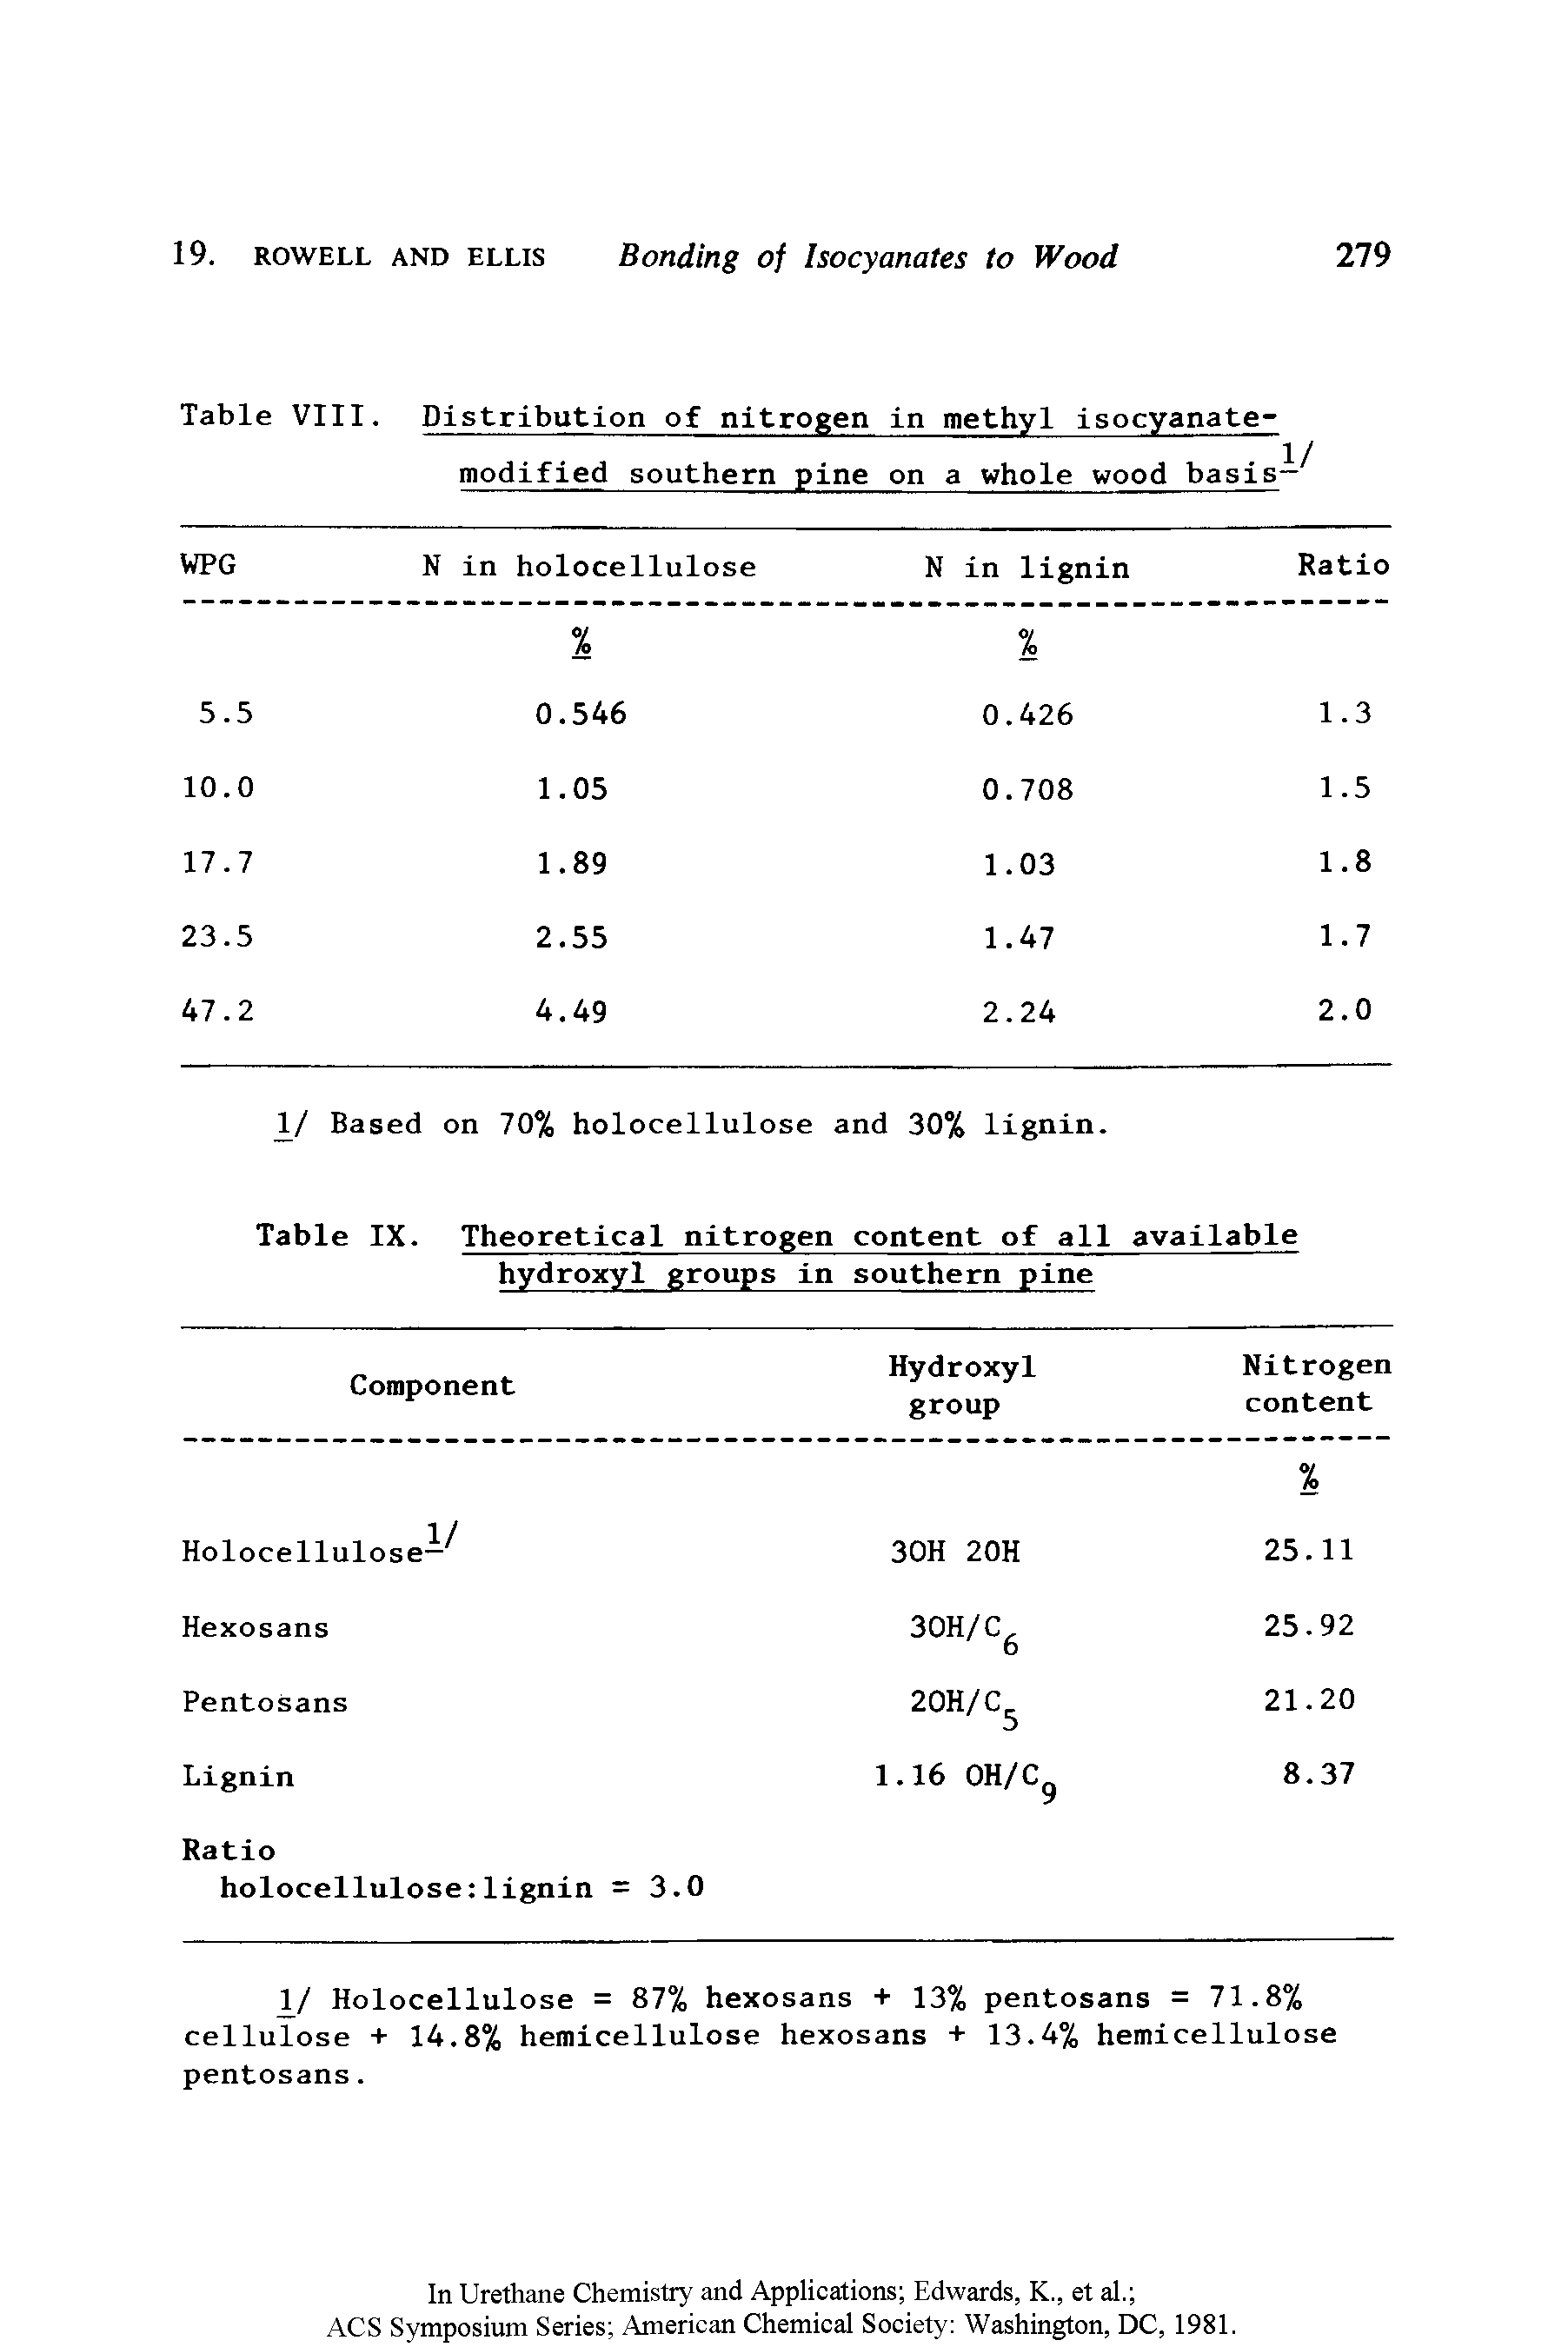 Table VIII. Distribution of nitrogen in methyl isocyanate-modified southern pine on a whole wood basis—...